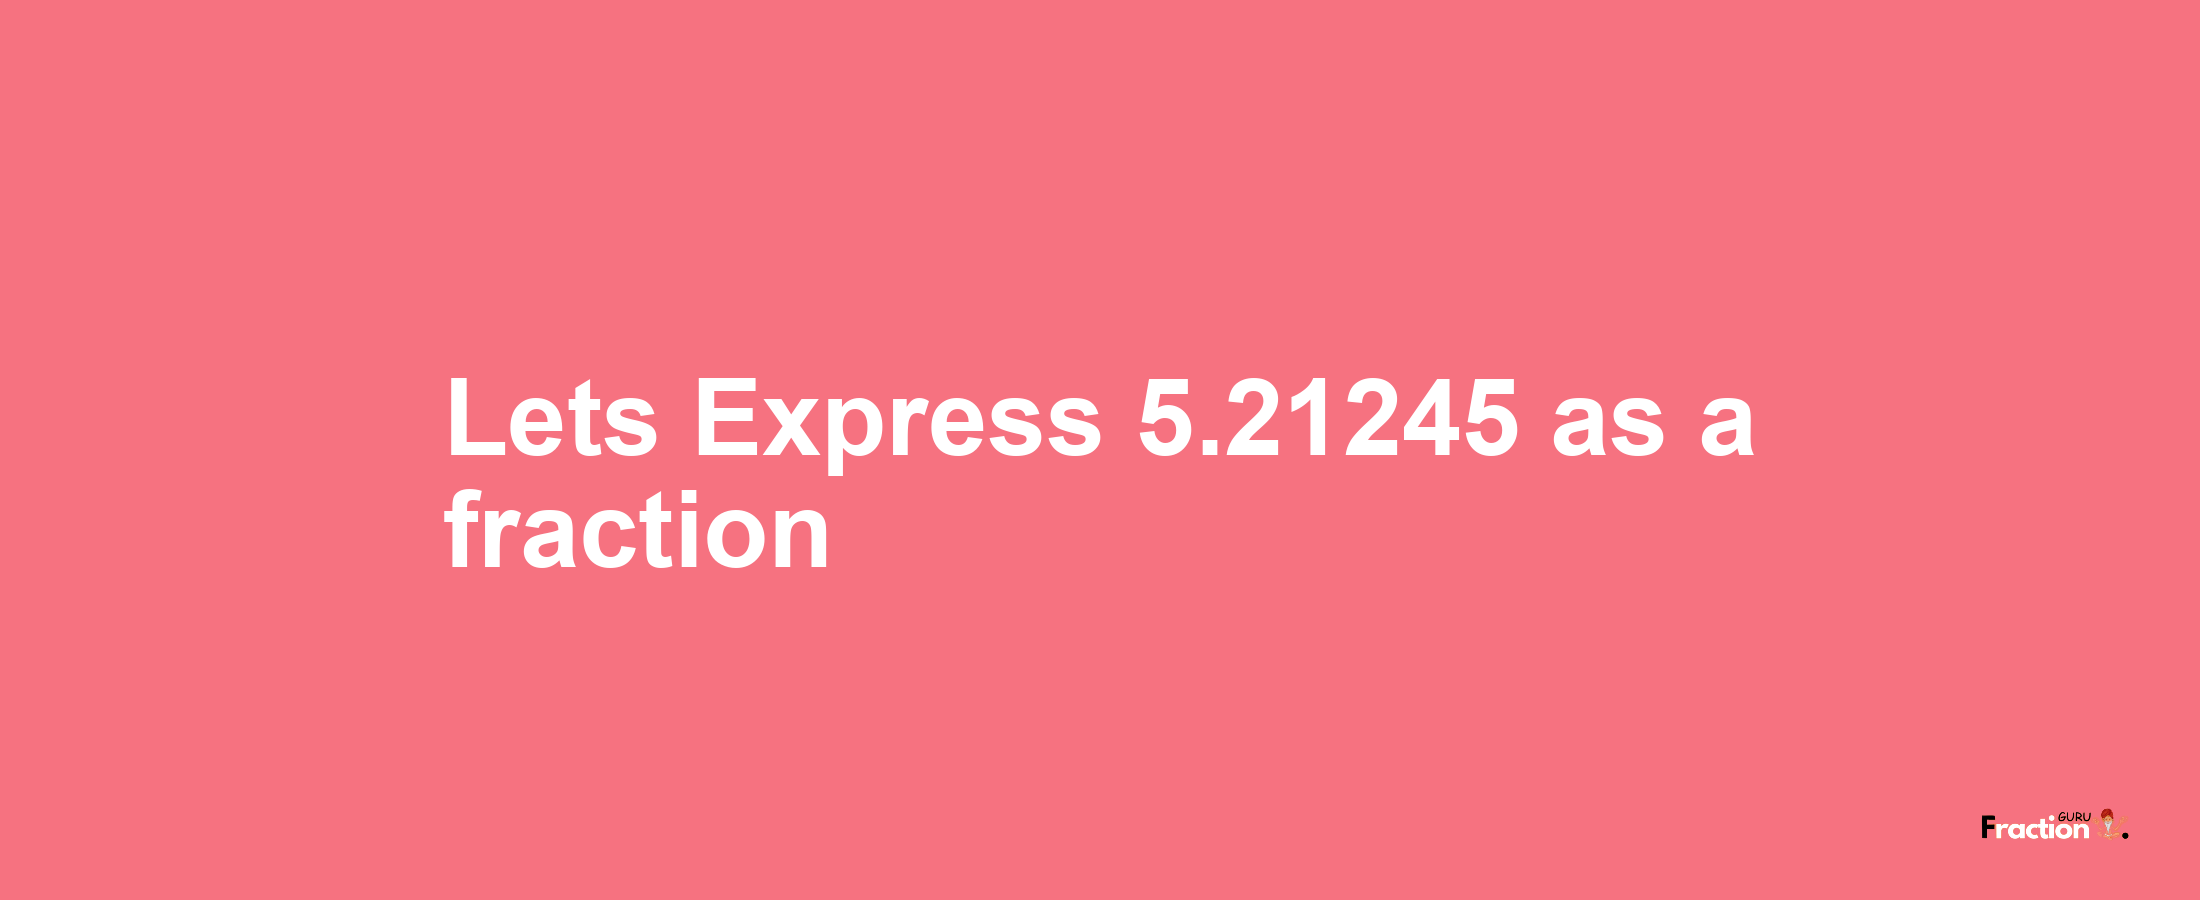 Lets Express 5.21245 as afraction